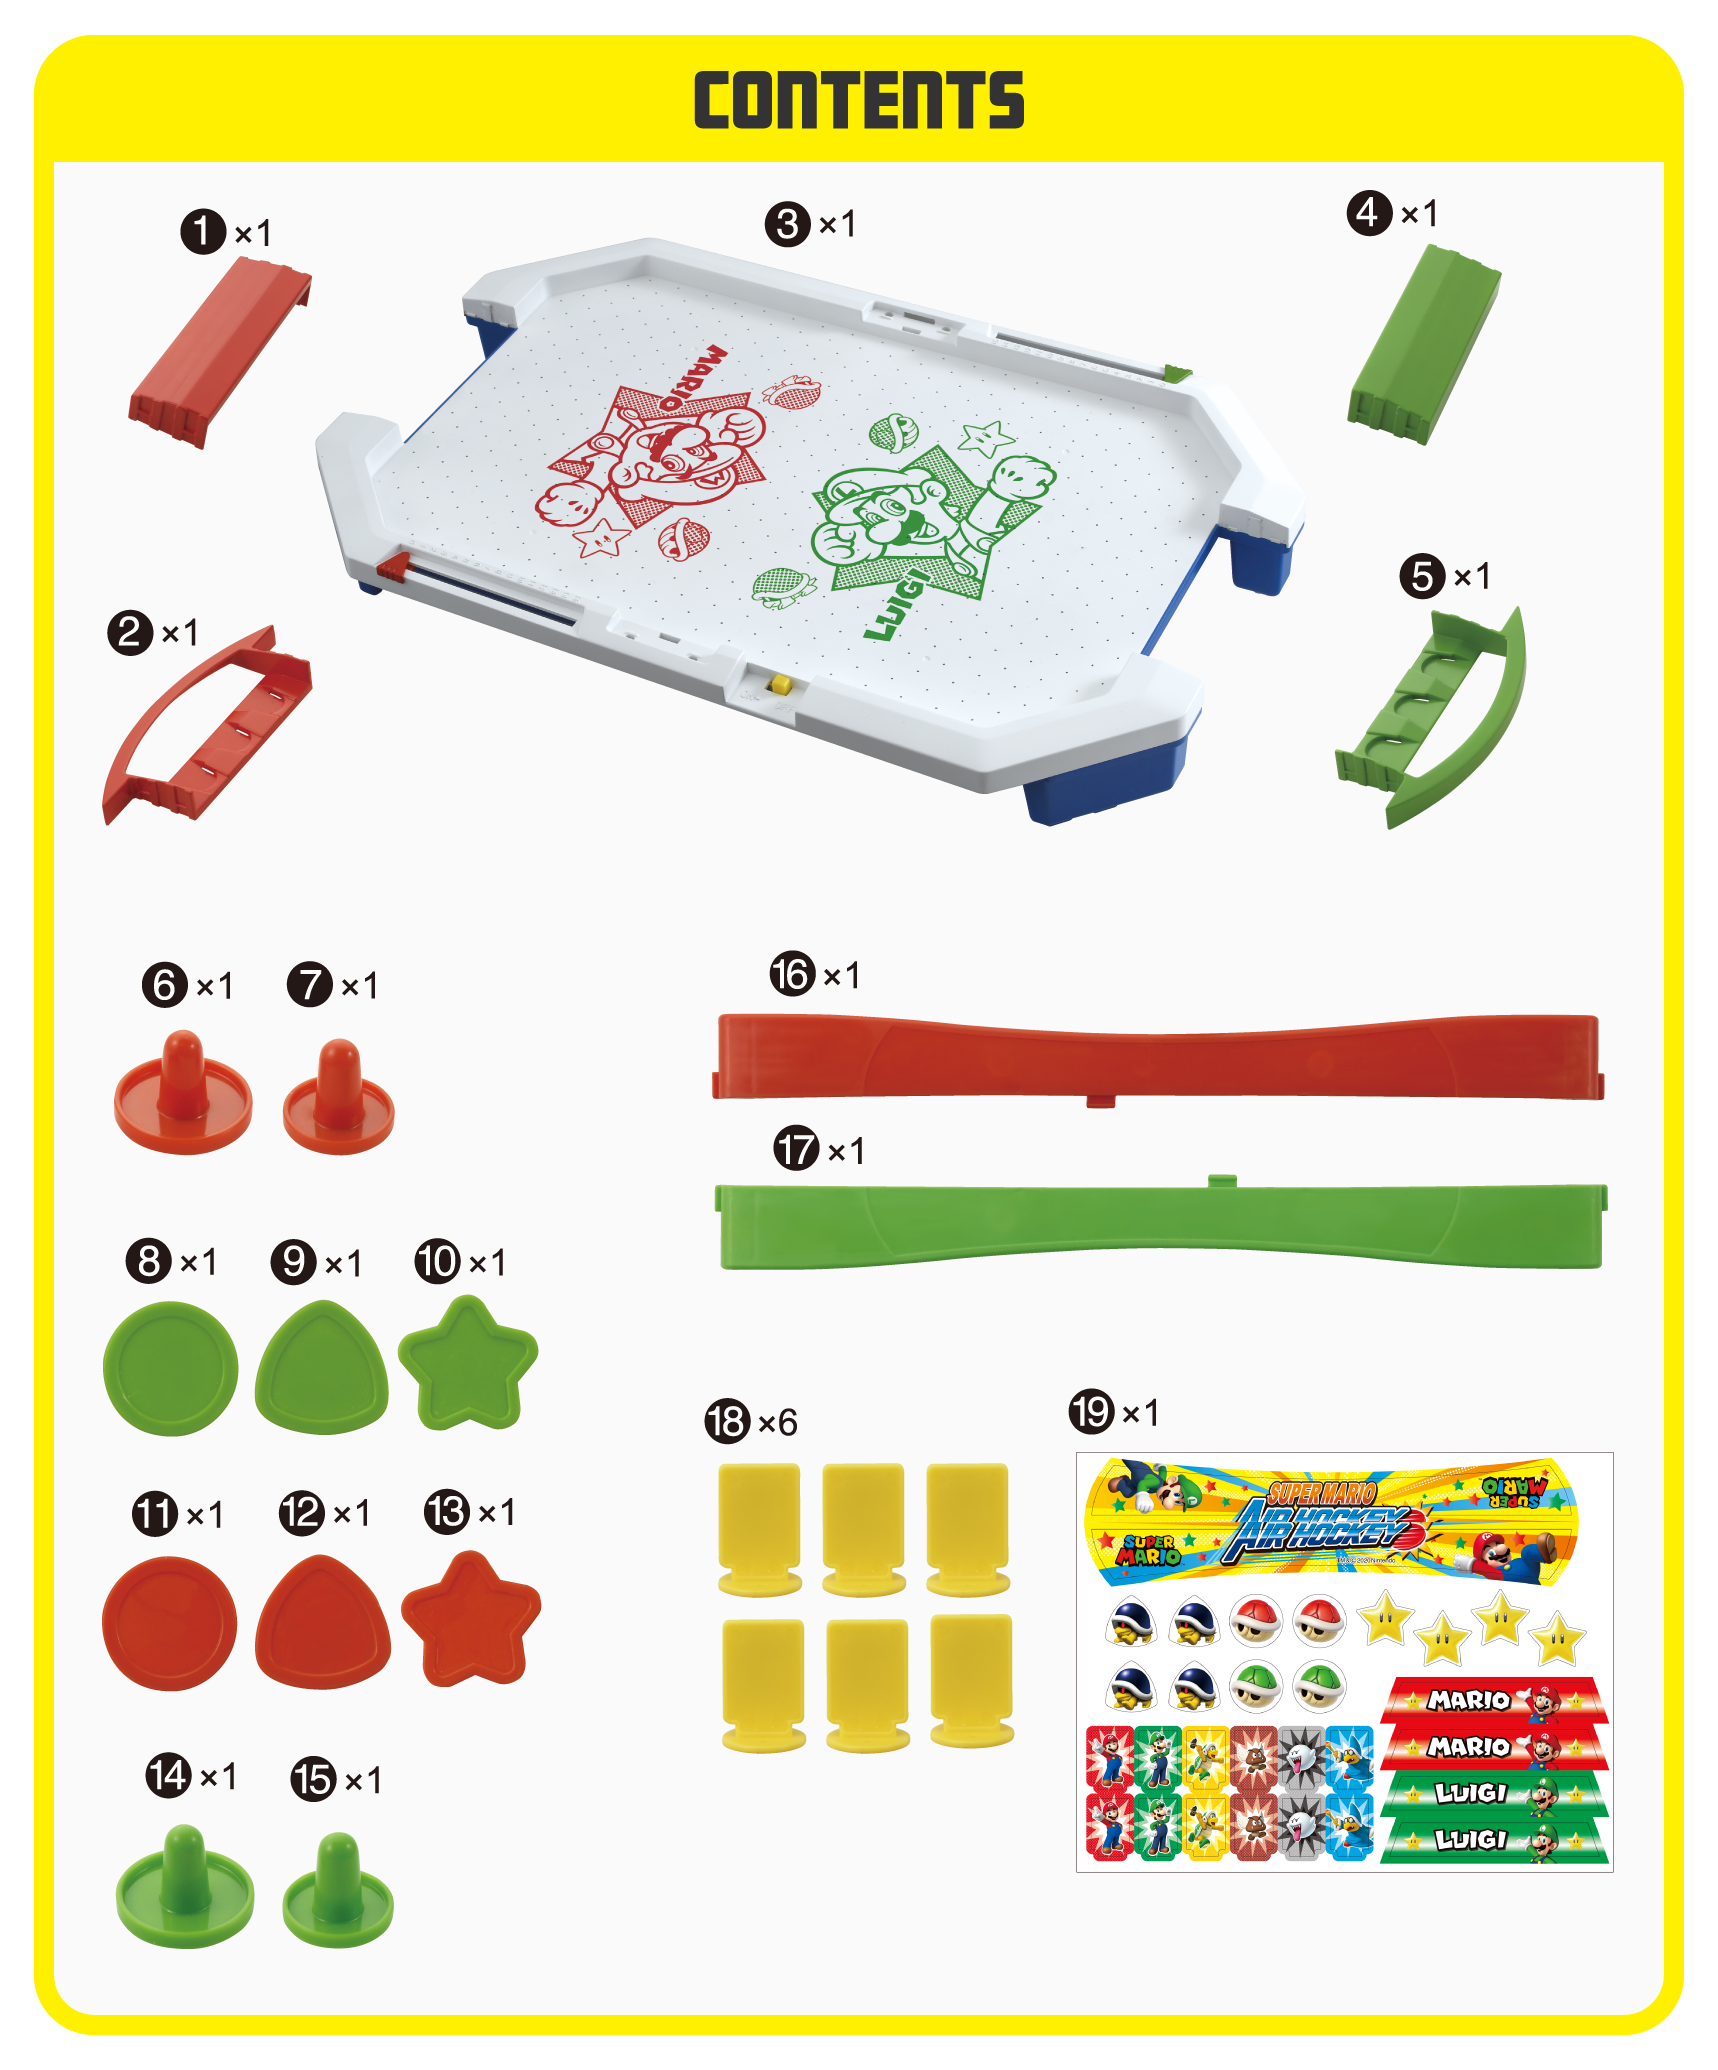 AIR HOCKEY Base, Arch (Red), Arch (Green), Normal Goal (Red), Normal Goal (Green), Shooting Goal (Red), Shooting Goal (Green), Large Striker (Red), Large Striker (Green), Small Striker (Red), Small Striker (Green), Circle Pack (Red), Circle Pack (Green), Triangle Pack (Red), Triangle Pack (Green), Star Pack (Red), Star Pack (Green), Character Plate x6, Label Sheet